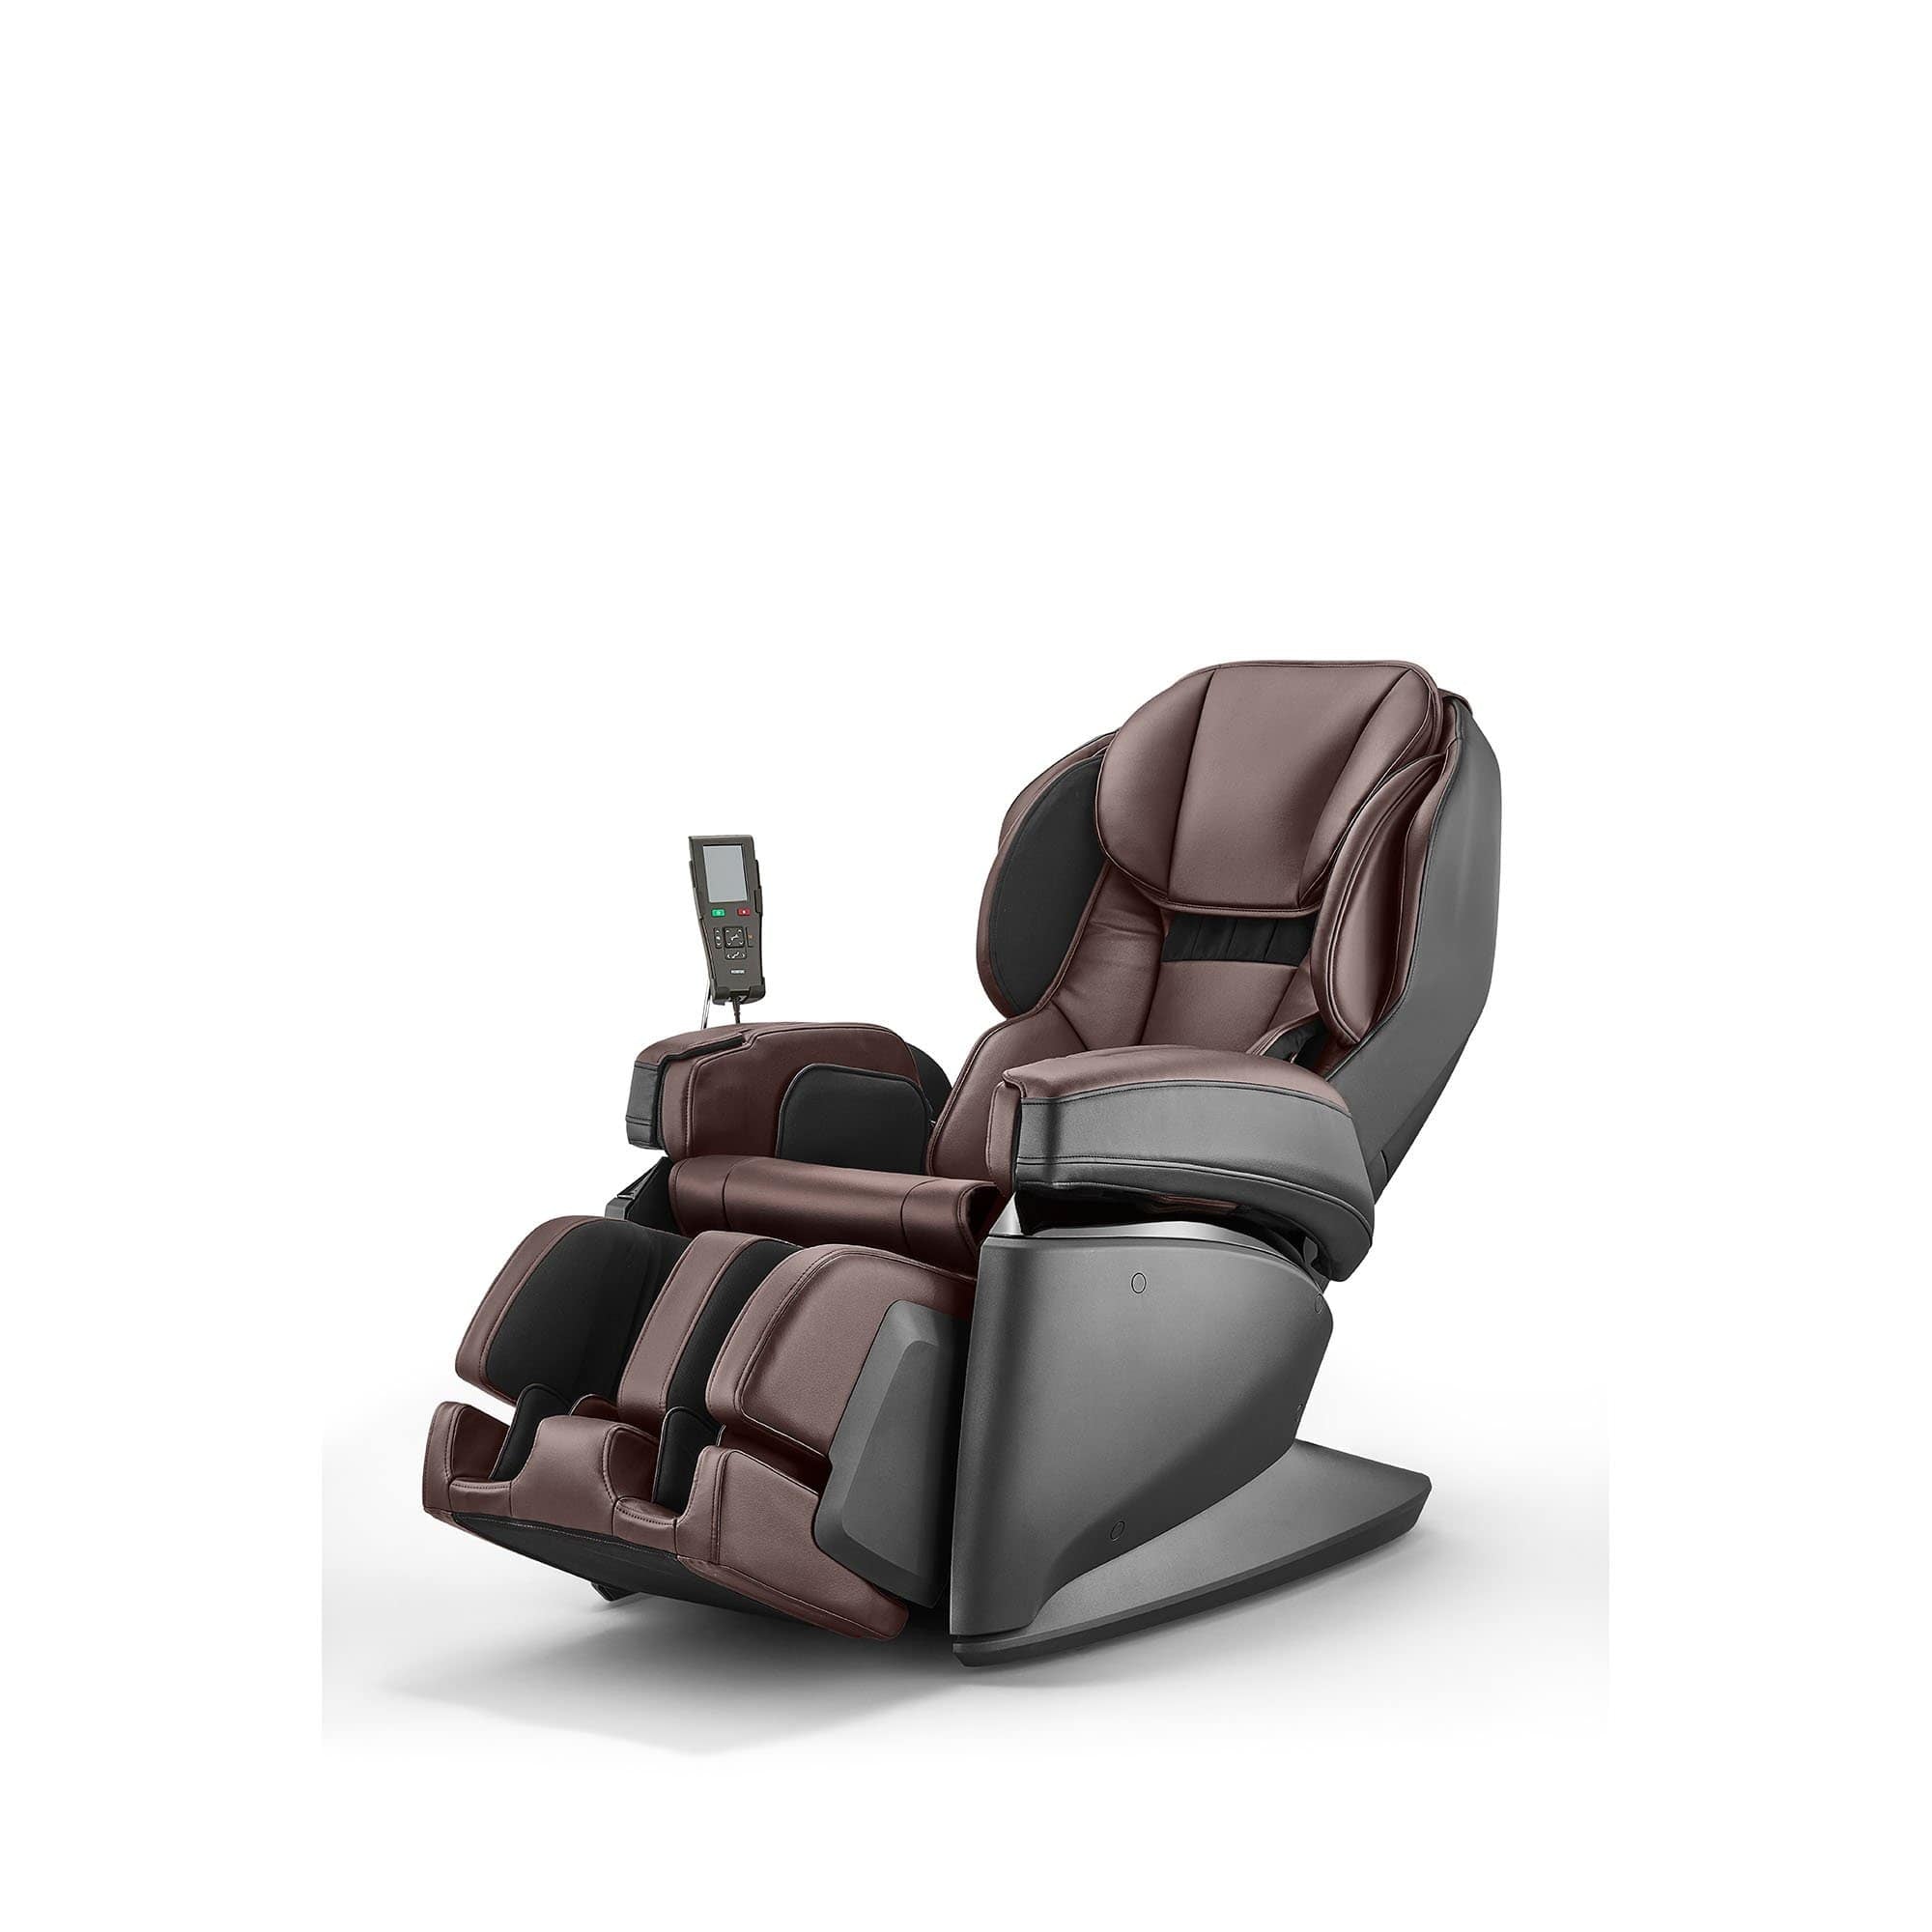 Synca Massage chair Synca 4D Ultra Premium Massage chair  JP1100 -Brown SMR0005-14NA